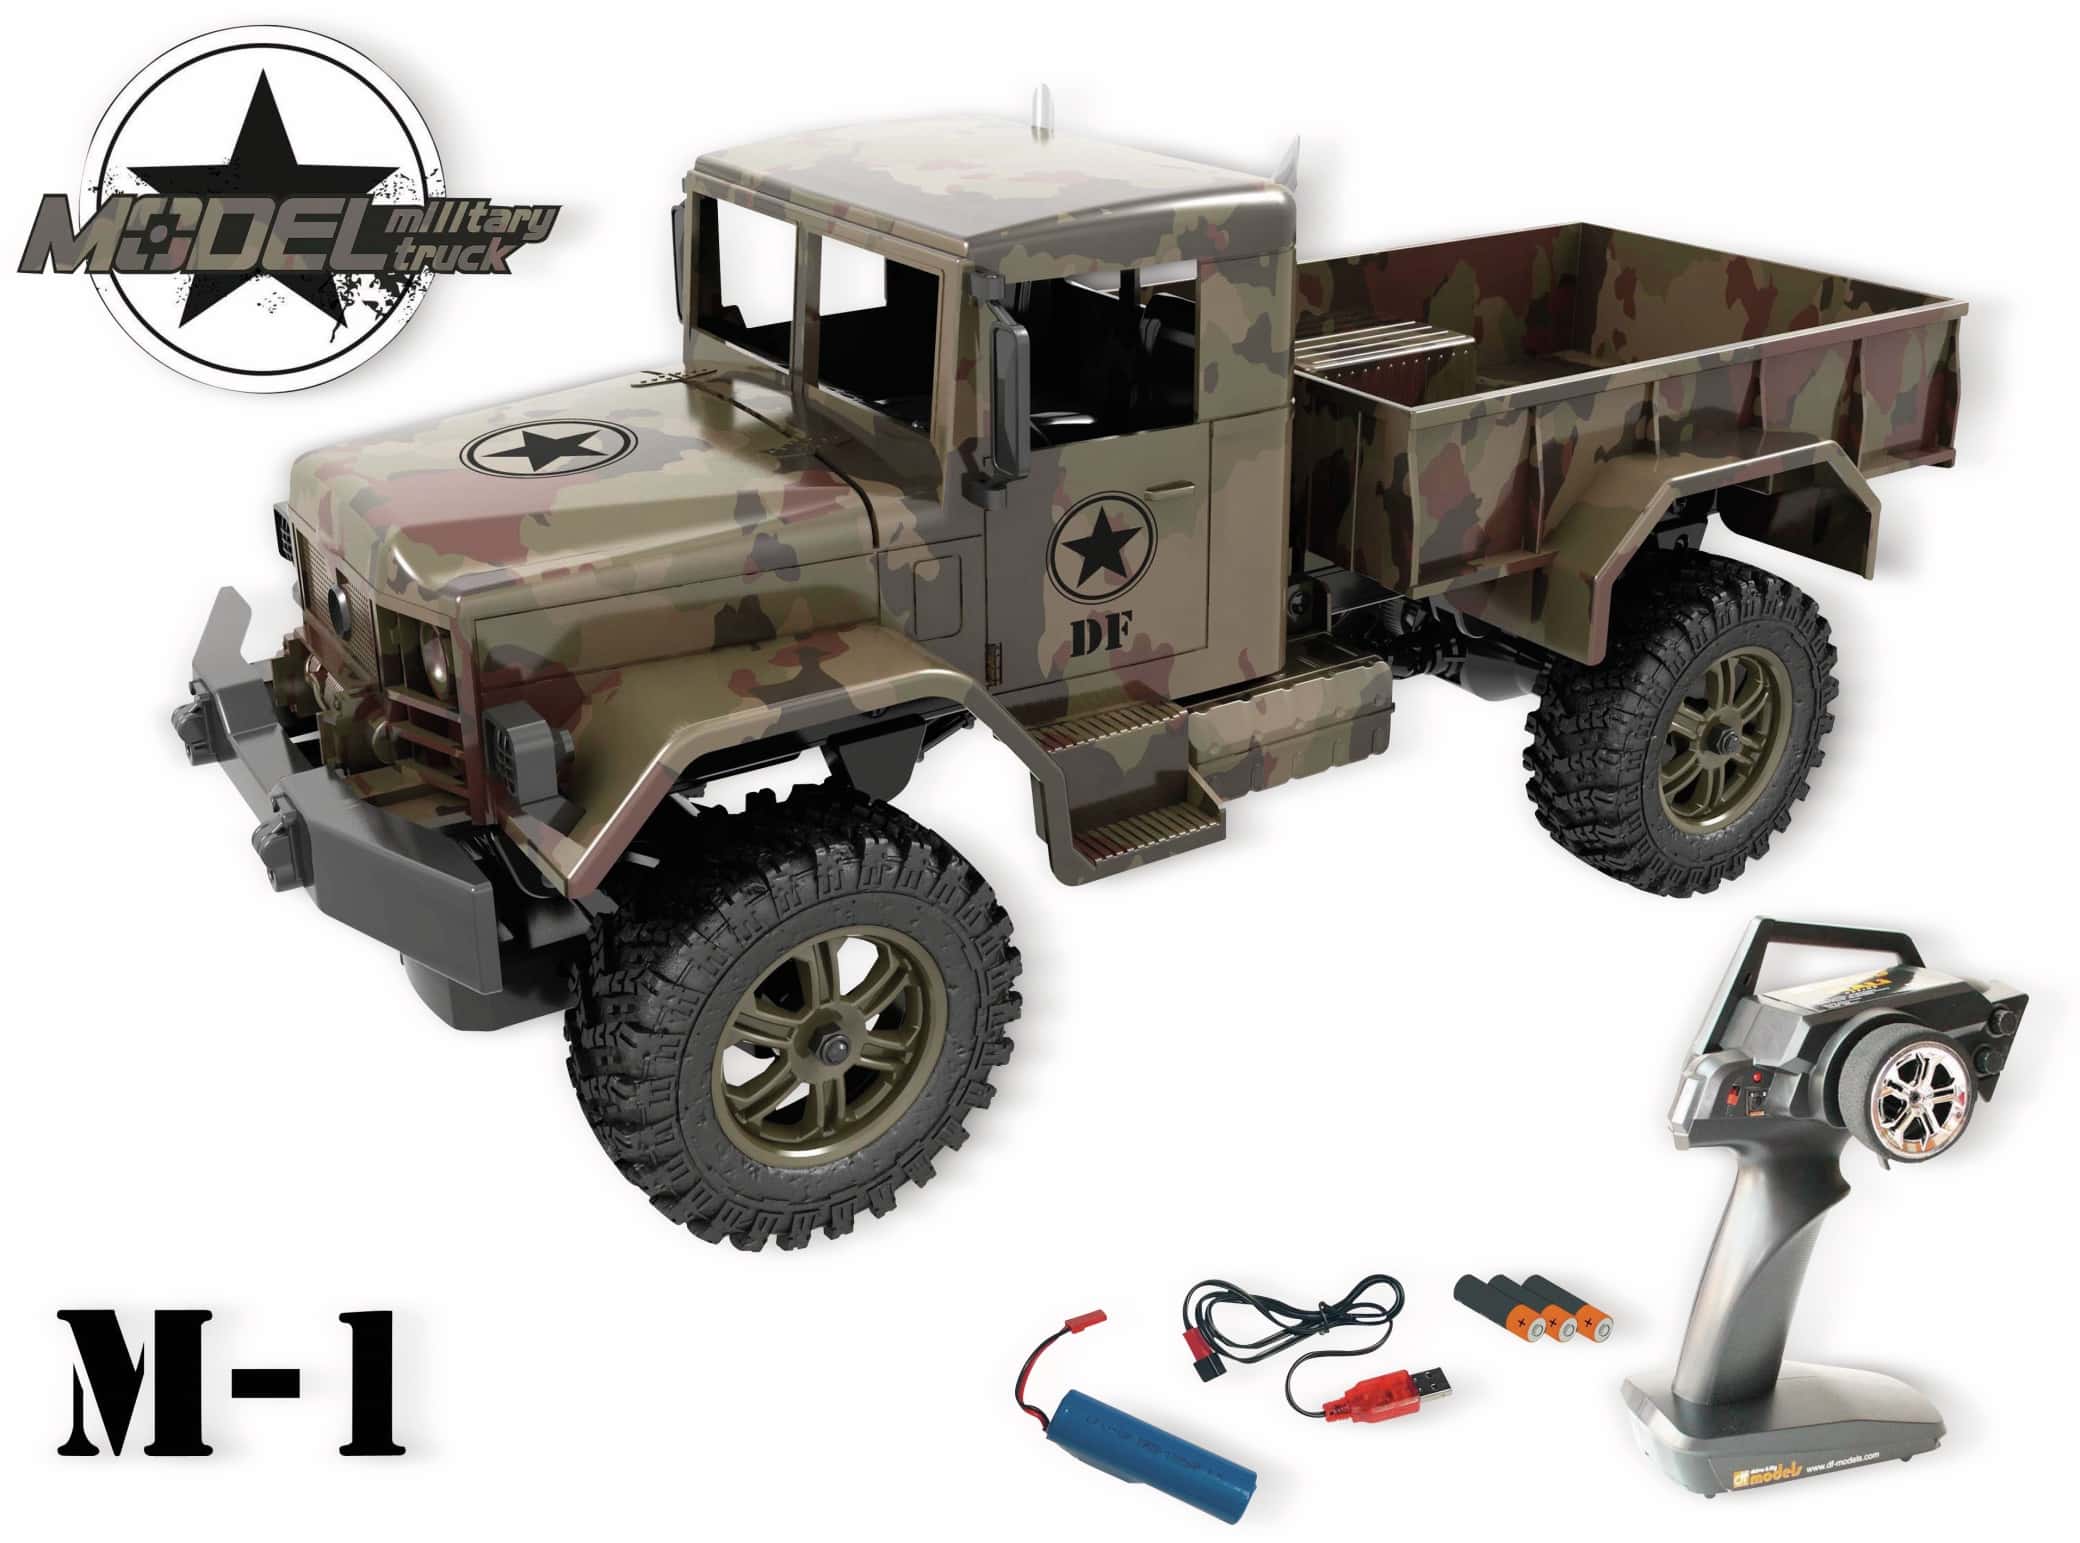 df models M1 Military Truck, 100 % RTR, 1:12 Scale